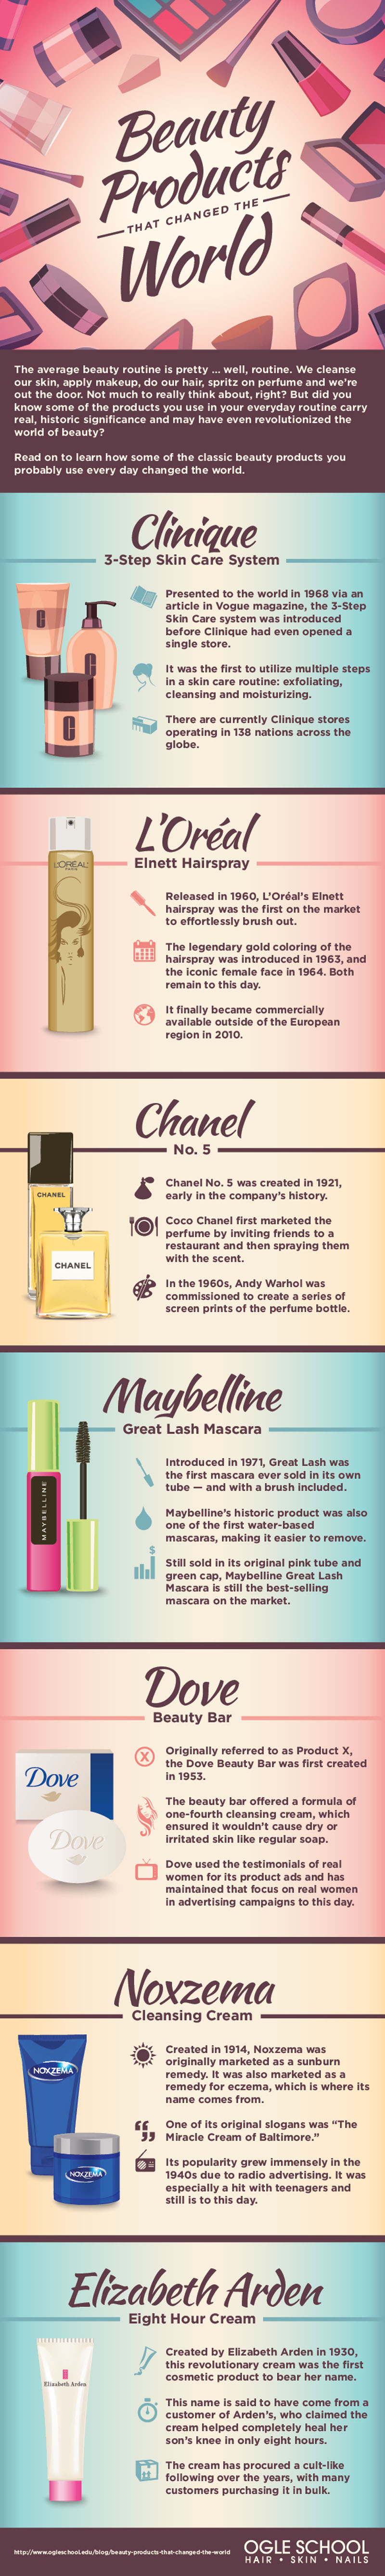 Beauty Products That Changed The World